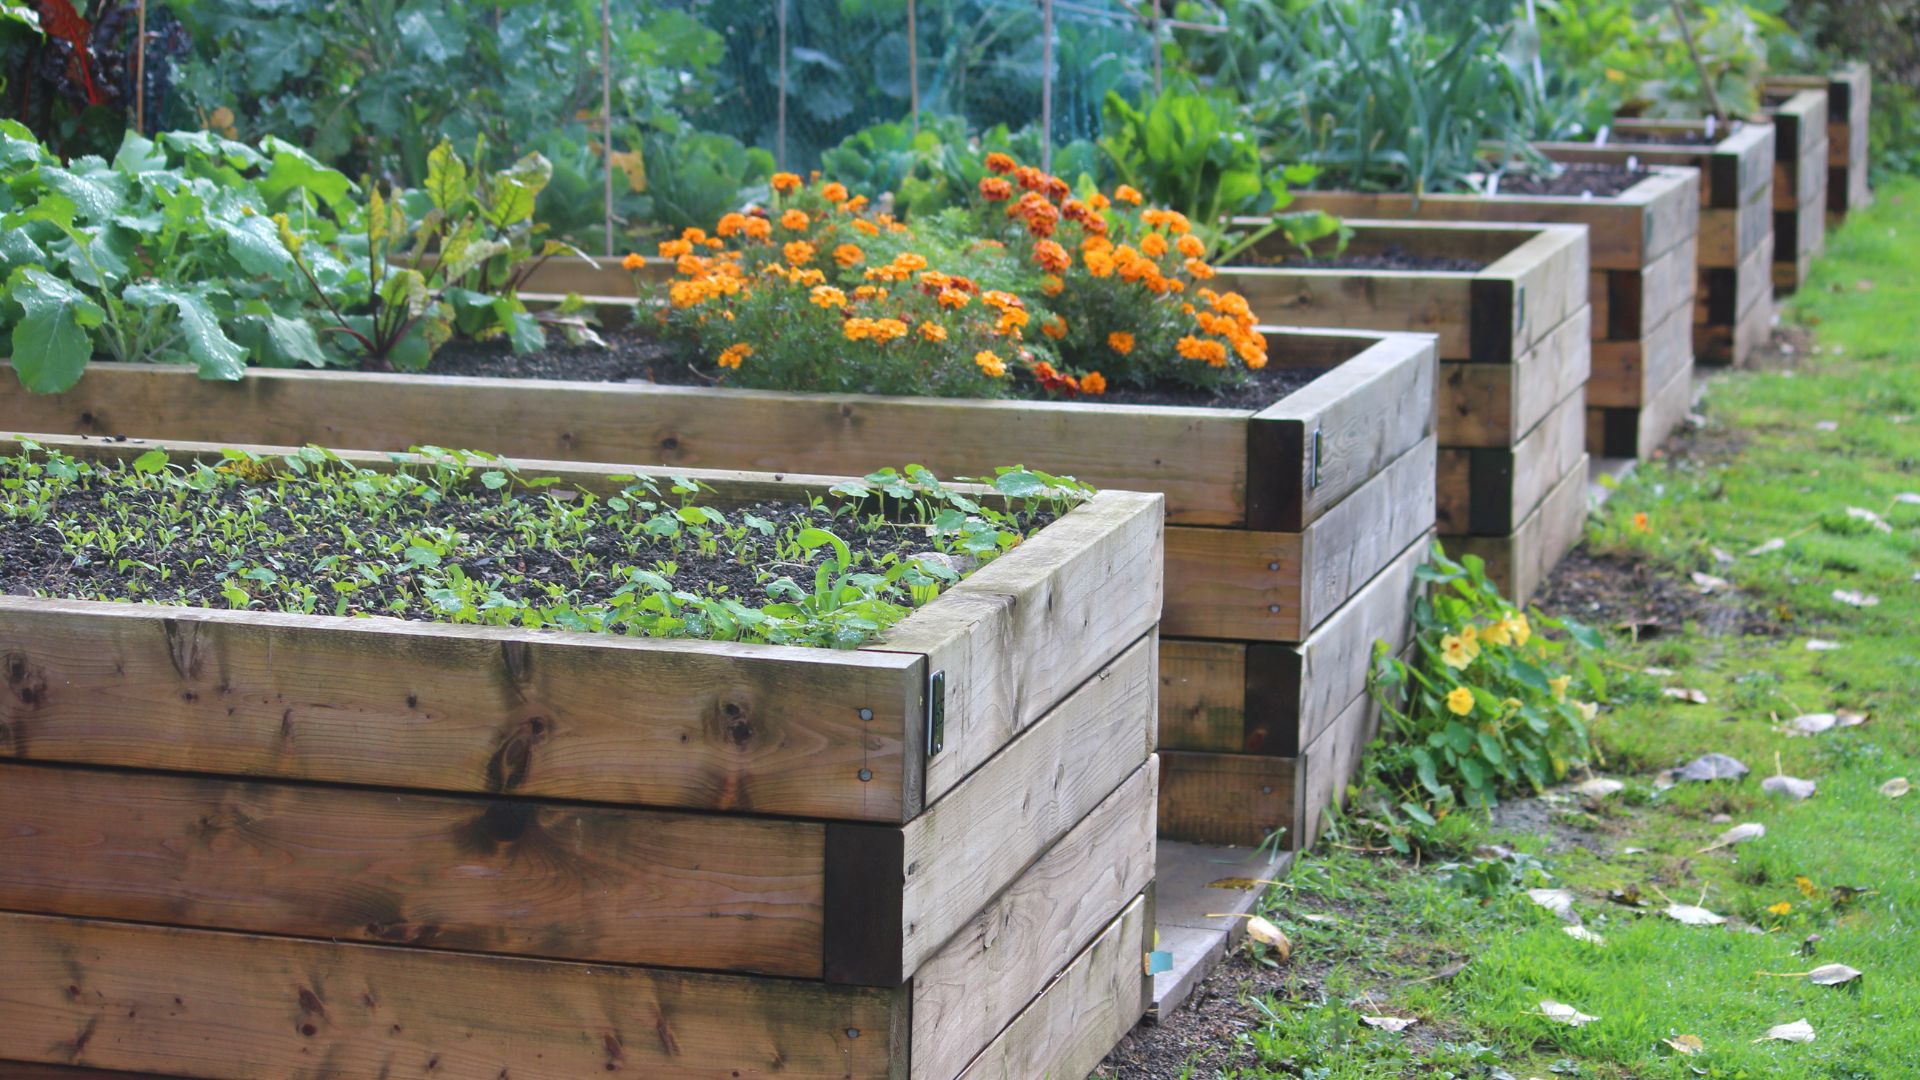 Rain Or Shine, These 19 Raised Bed Plants Will Flourish In Your Wet Climate Garden